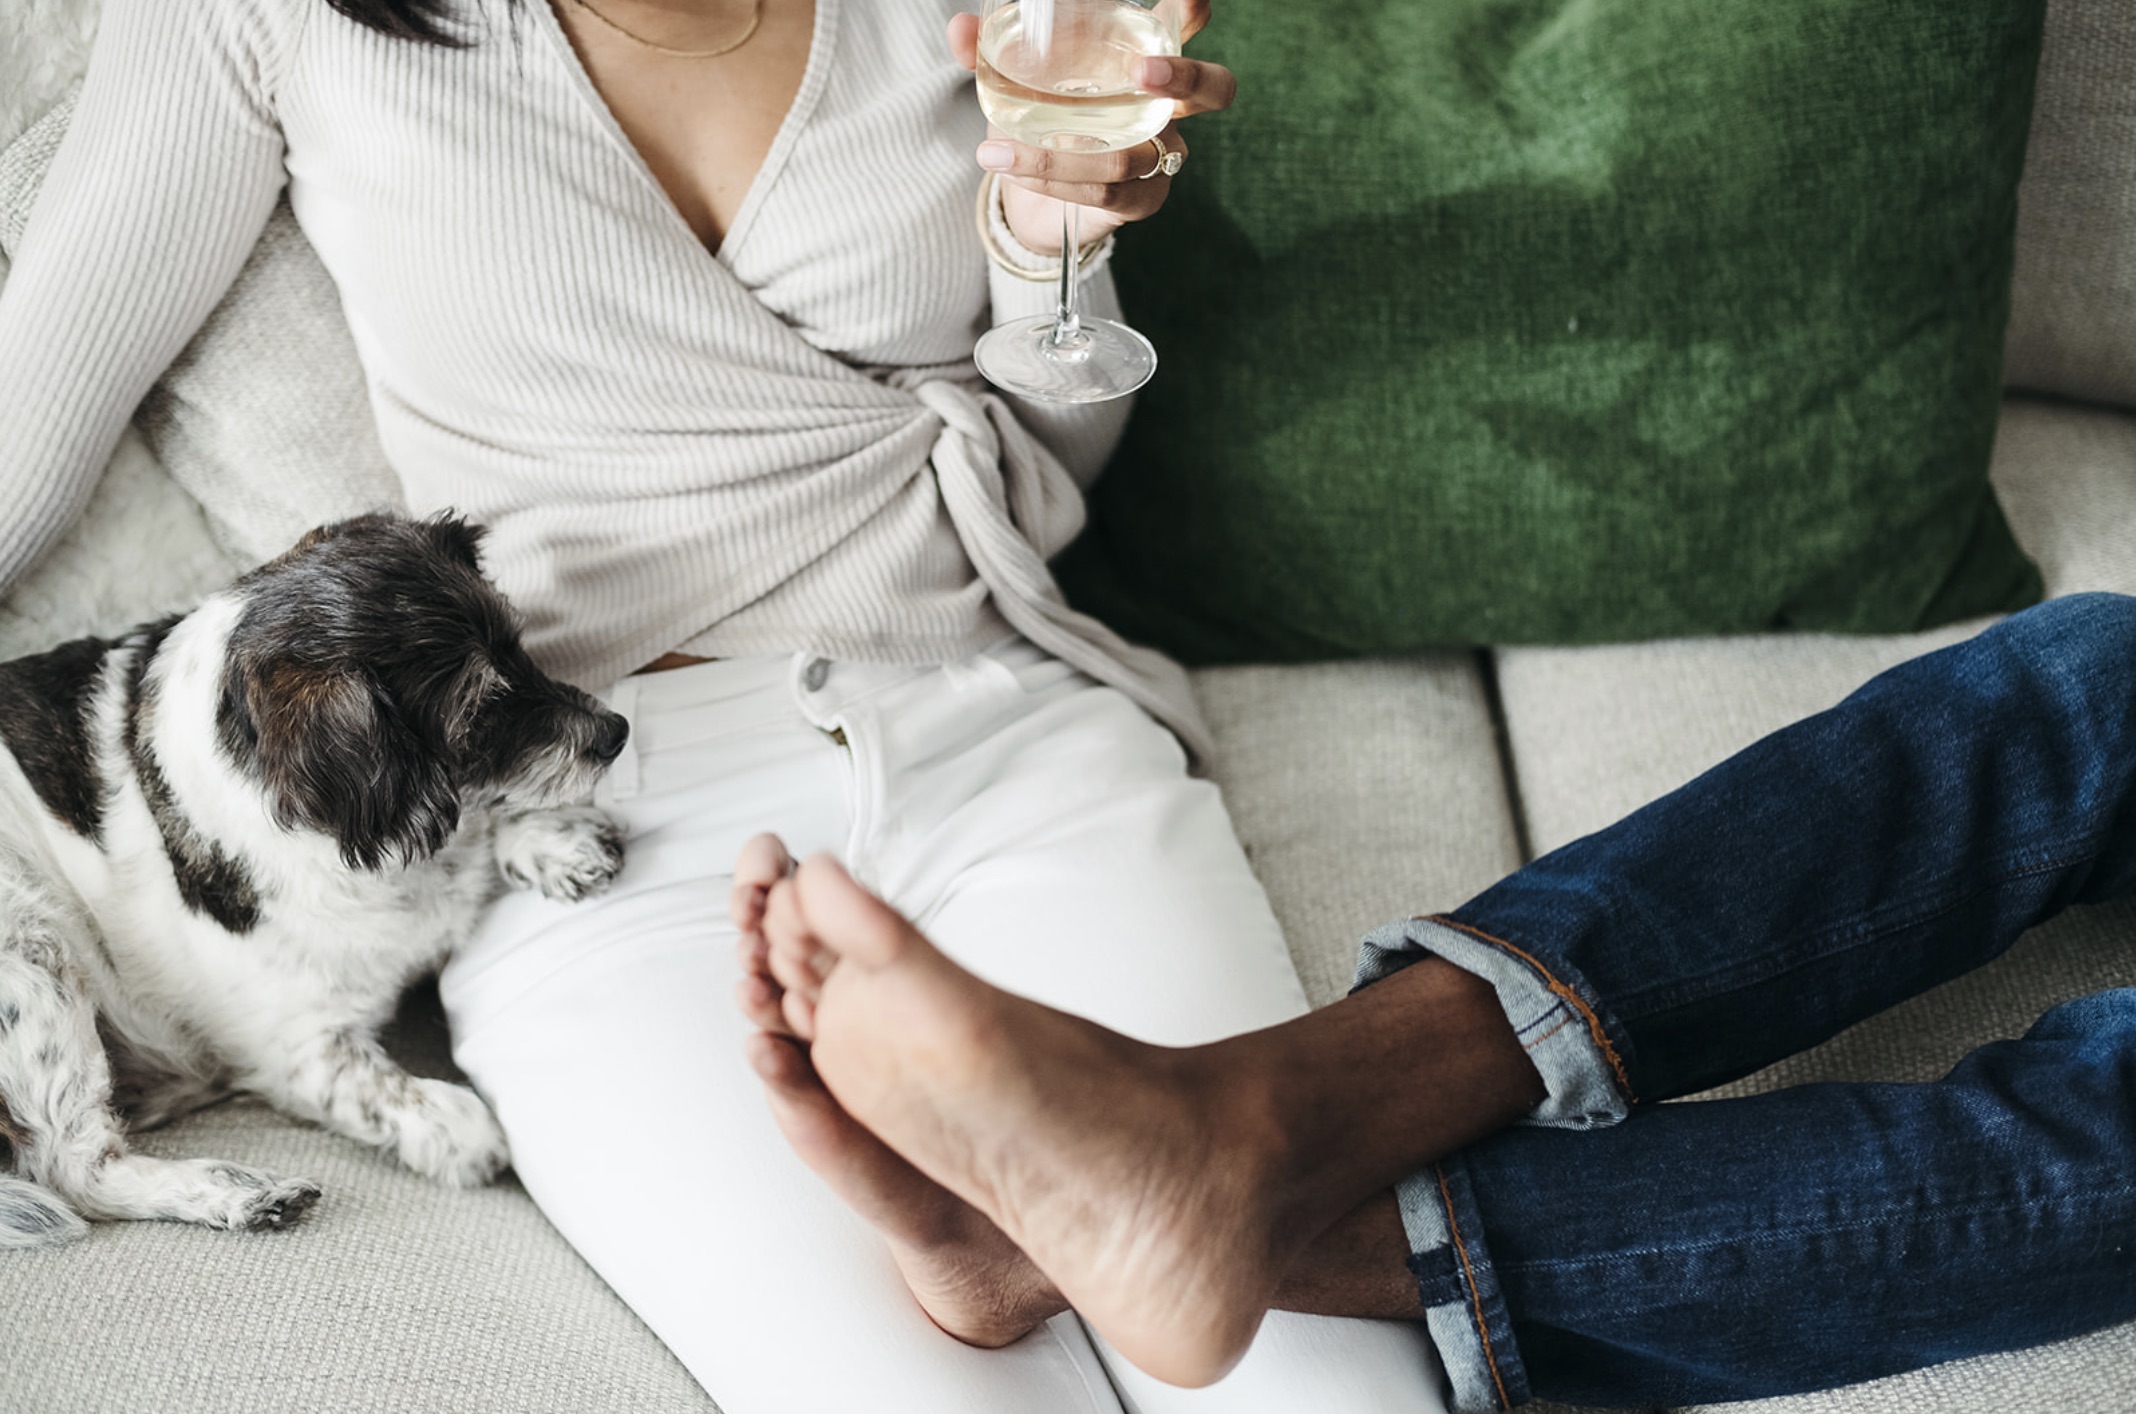 Close-up shot of girl sitting on the couch and holding a glass of champagne with the guy's feet on her lap and their dog beside her